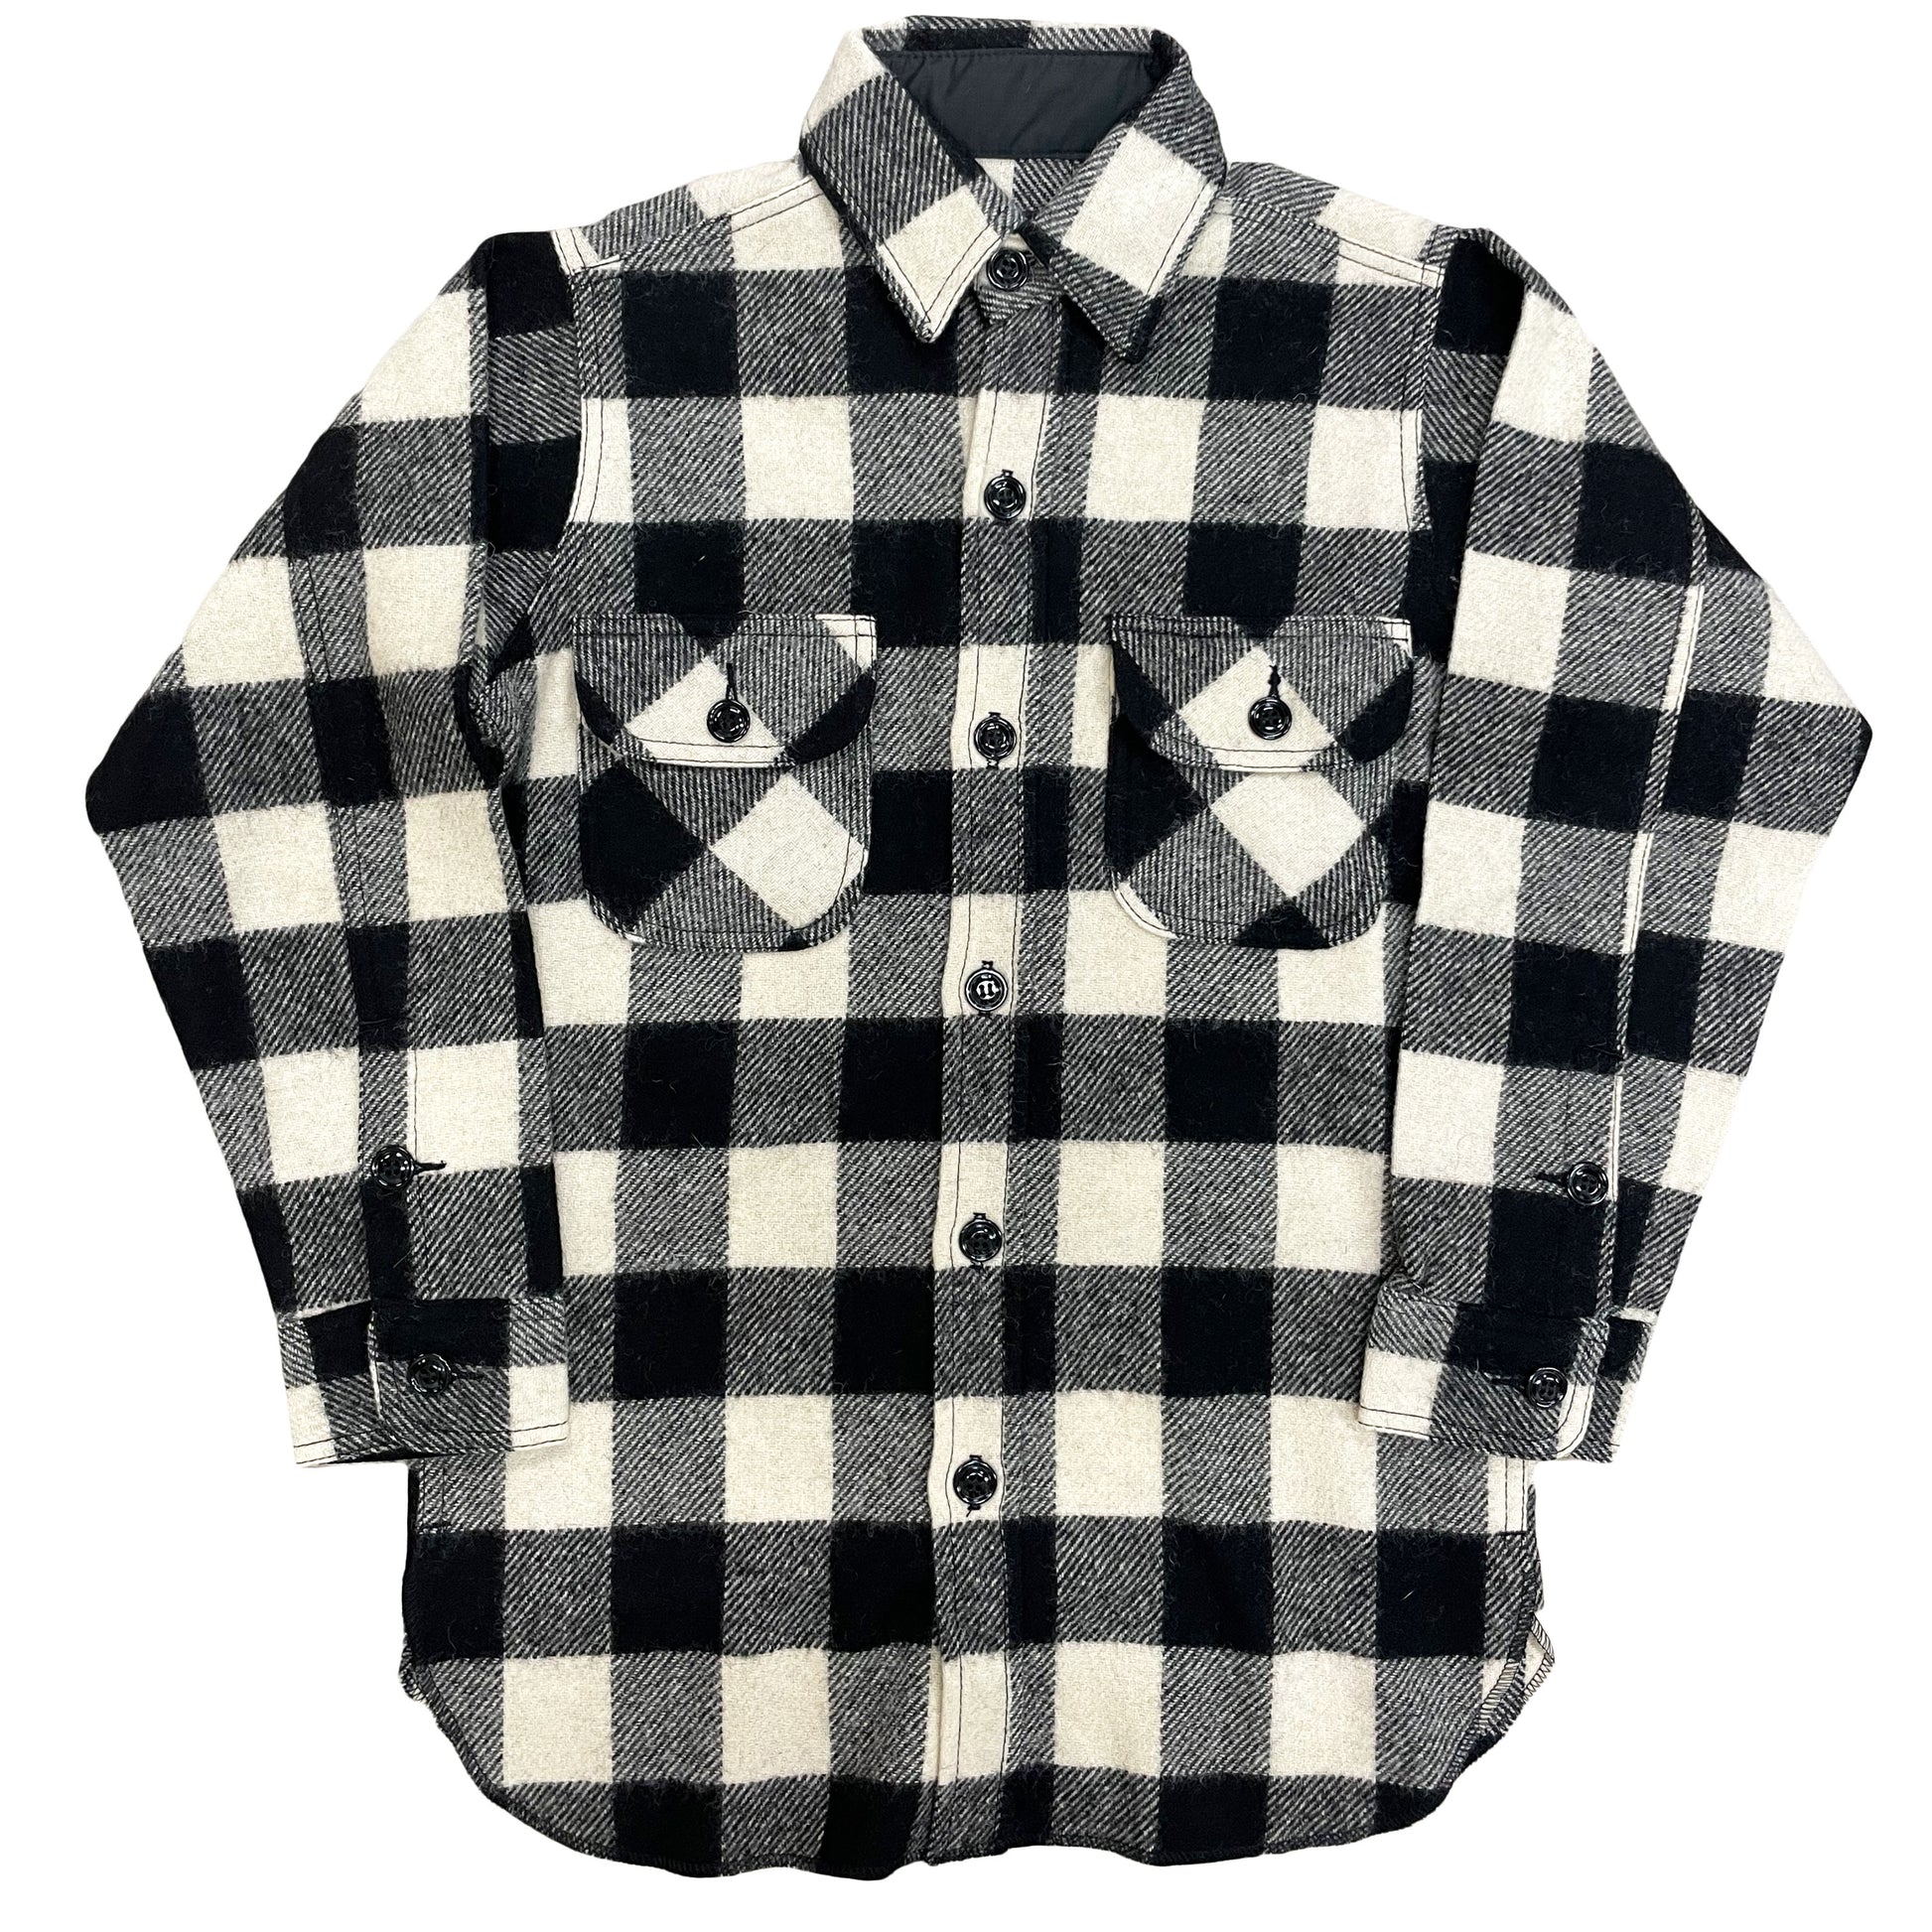 Black and White Wool long tail button down shirt